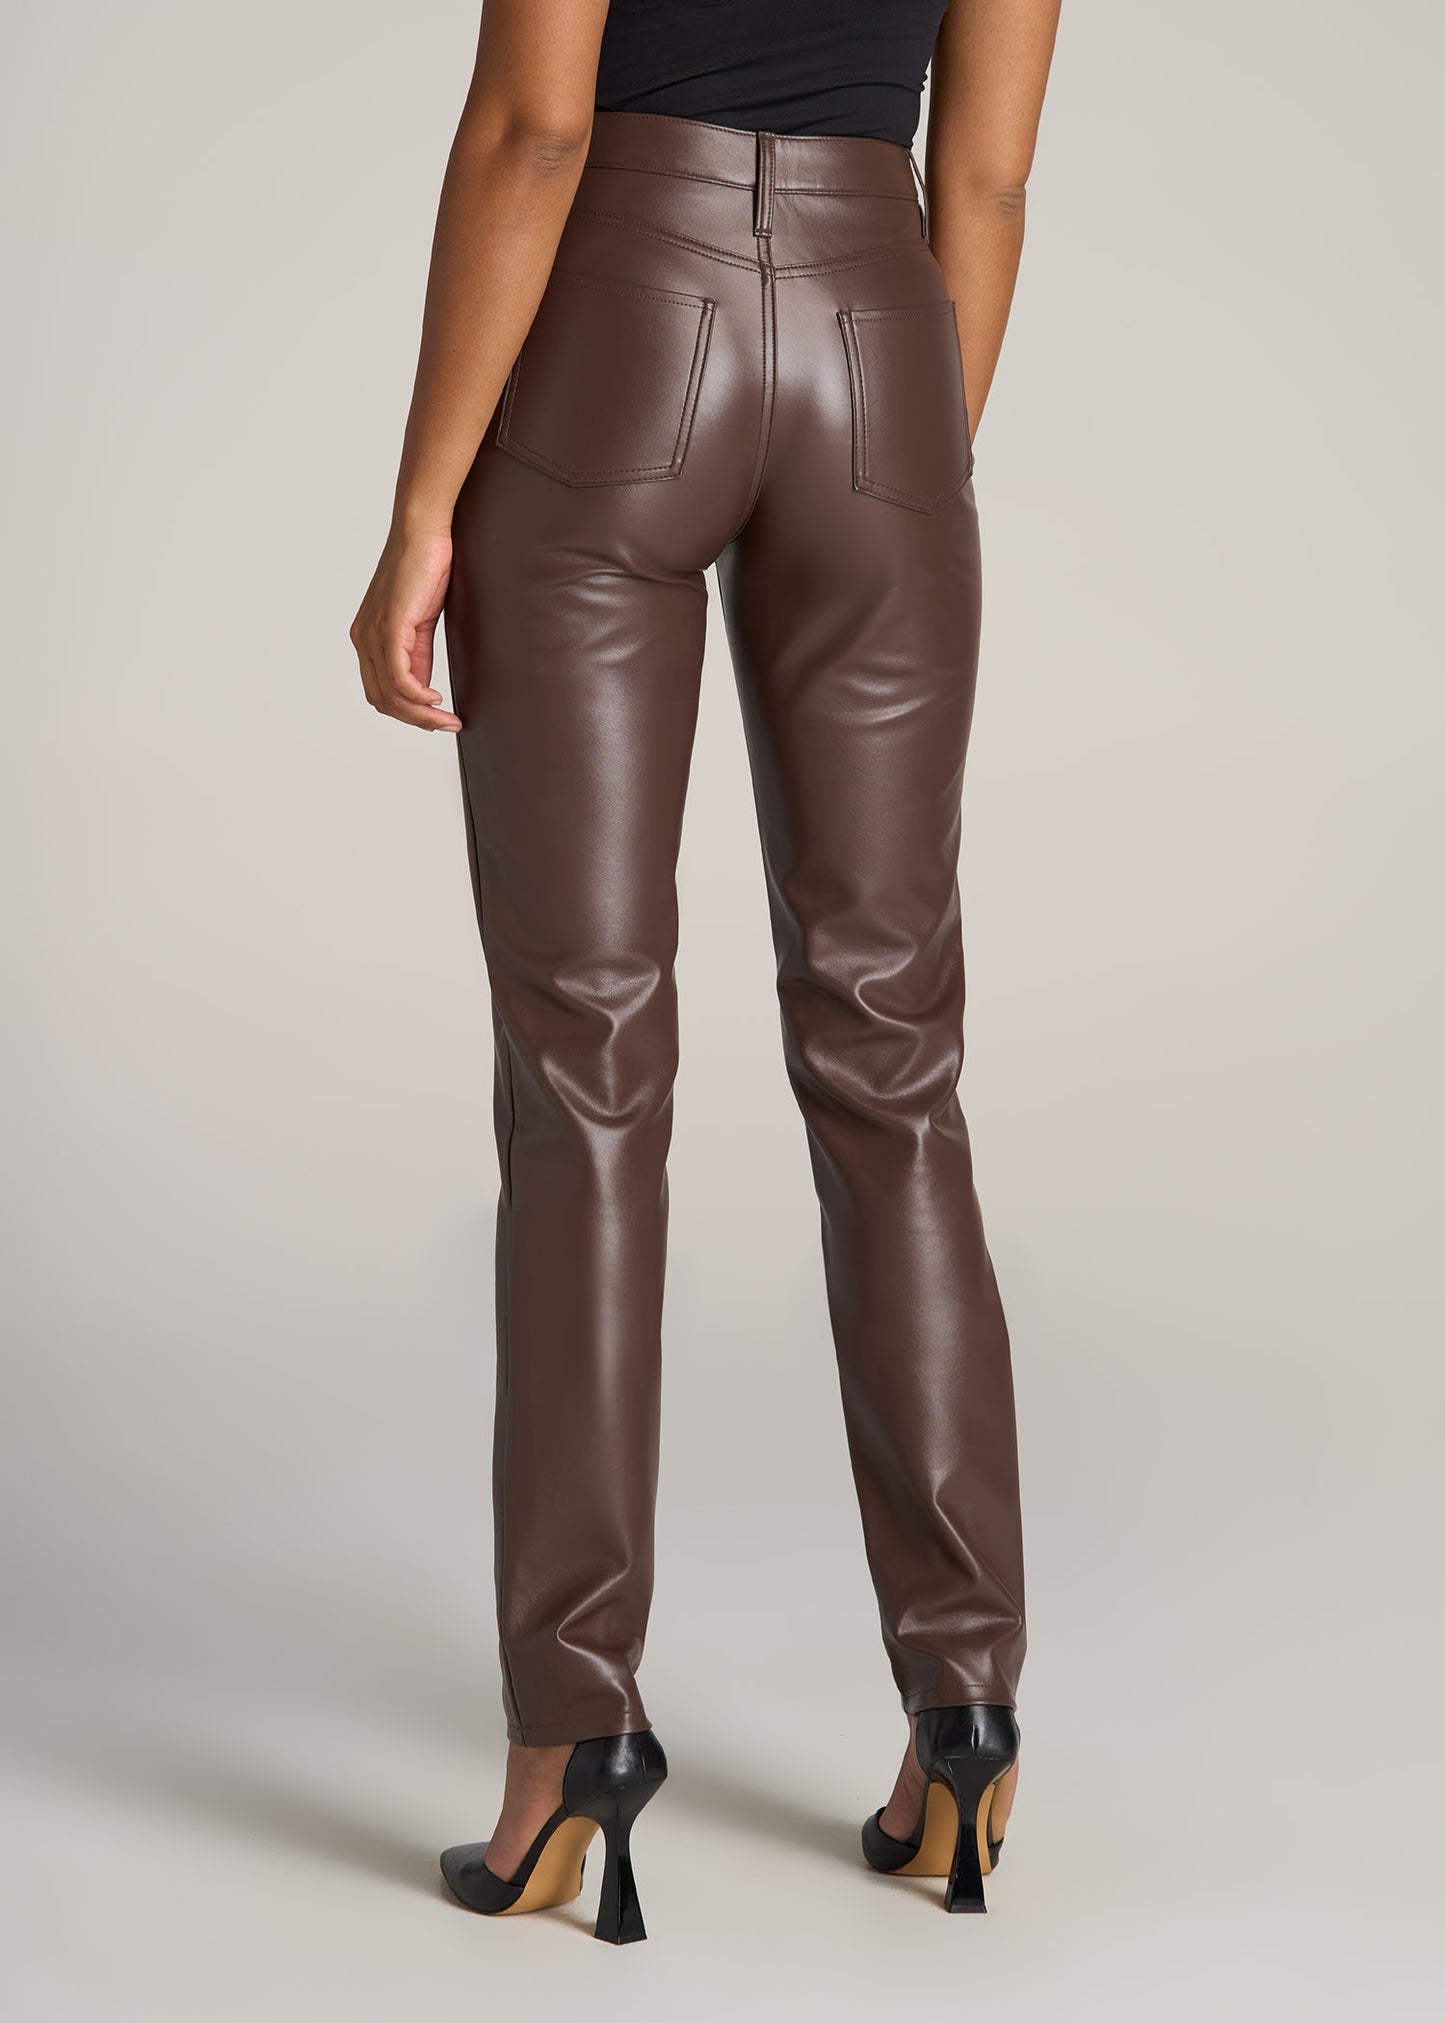 All Worthy Hunter McGrady The Ultimate Tall Faux Leather Legging - QVC.com